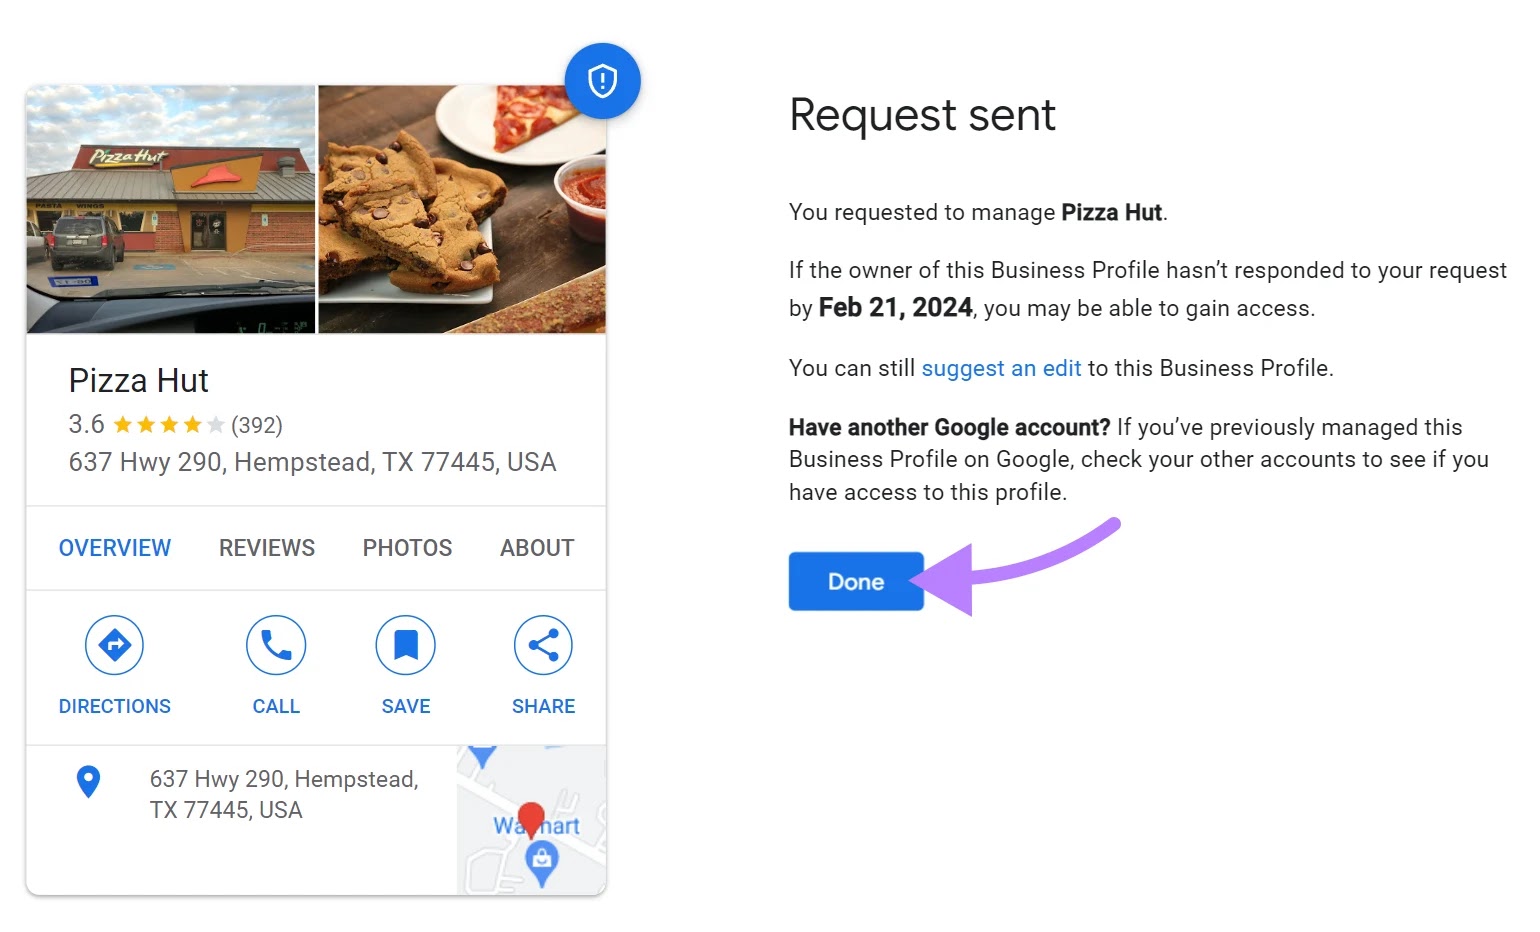 "Request sent" surface  connected  Google